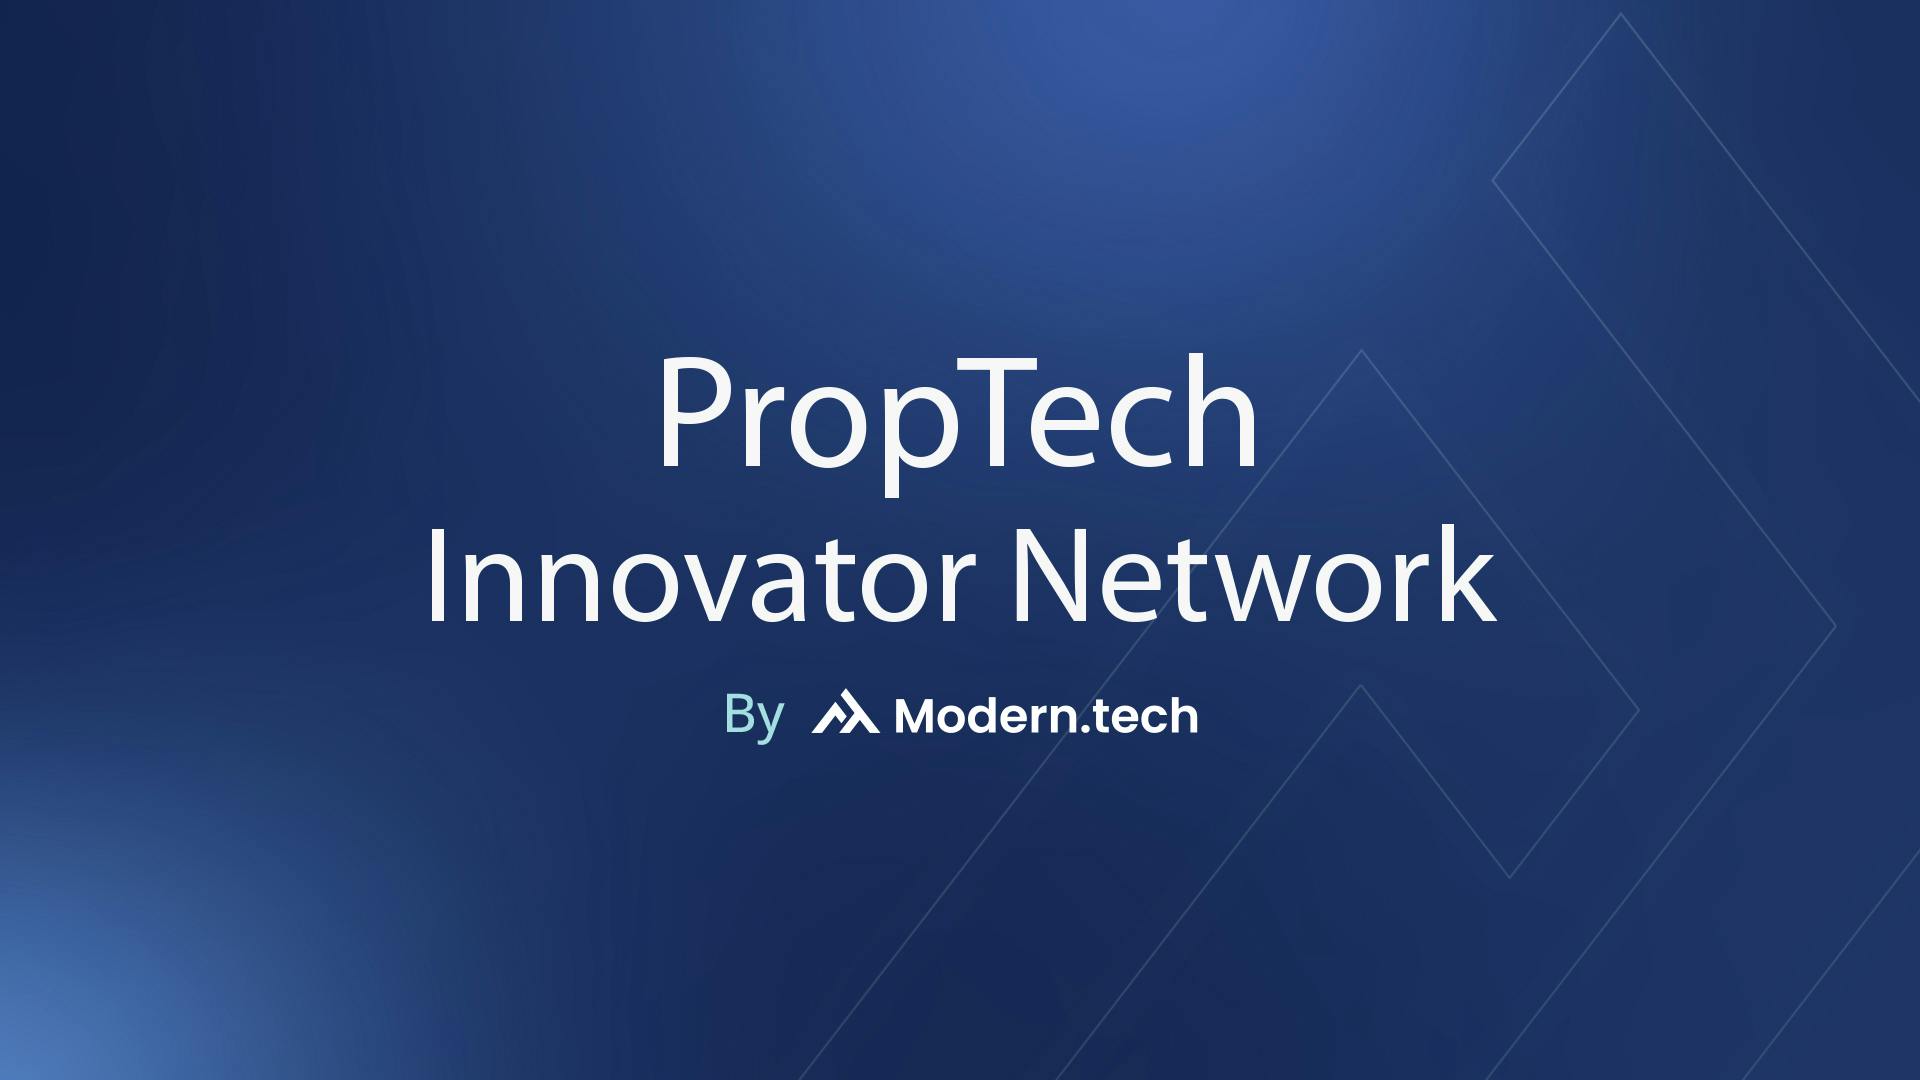 Modern.tech Launches the PropTech Innovator Network4